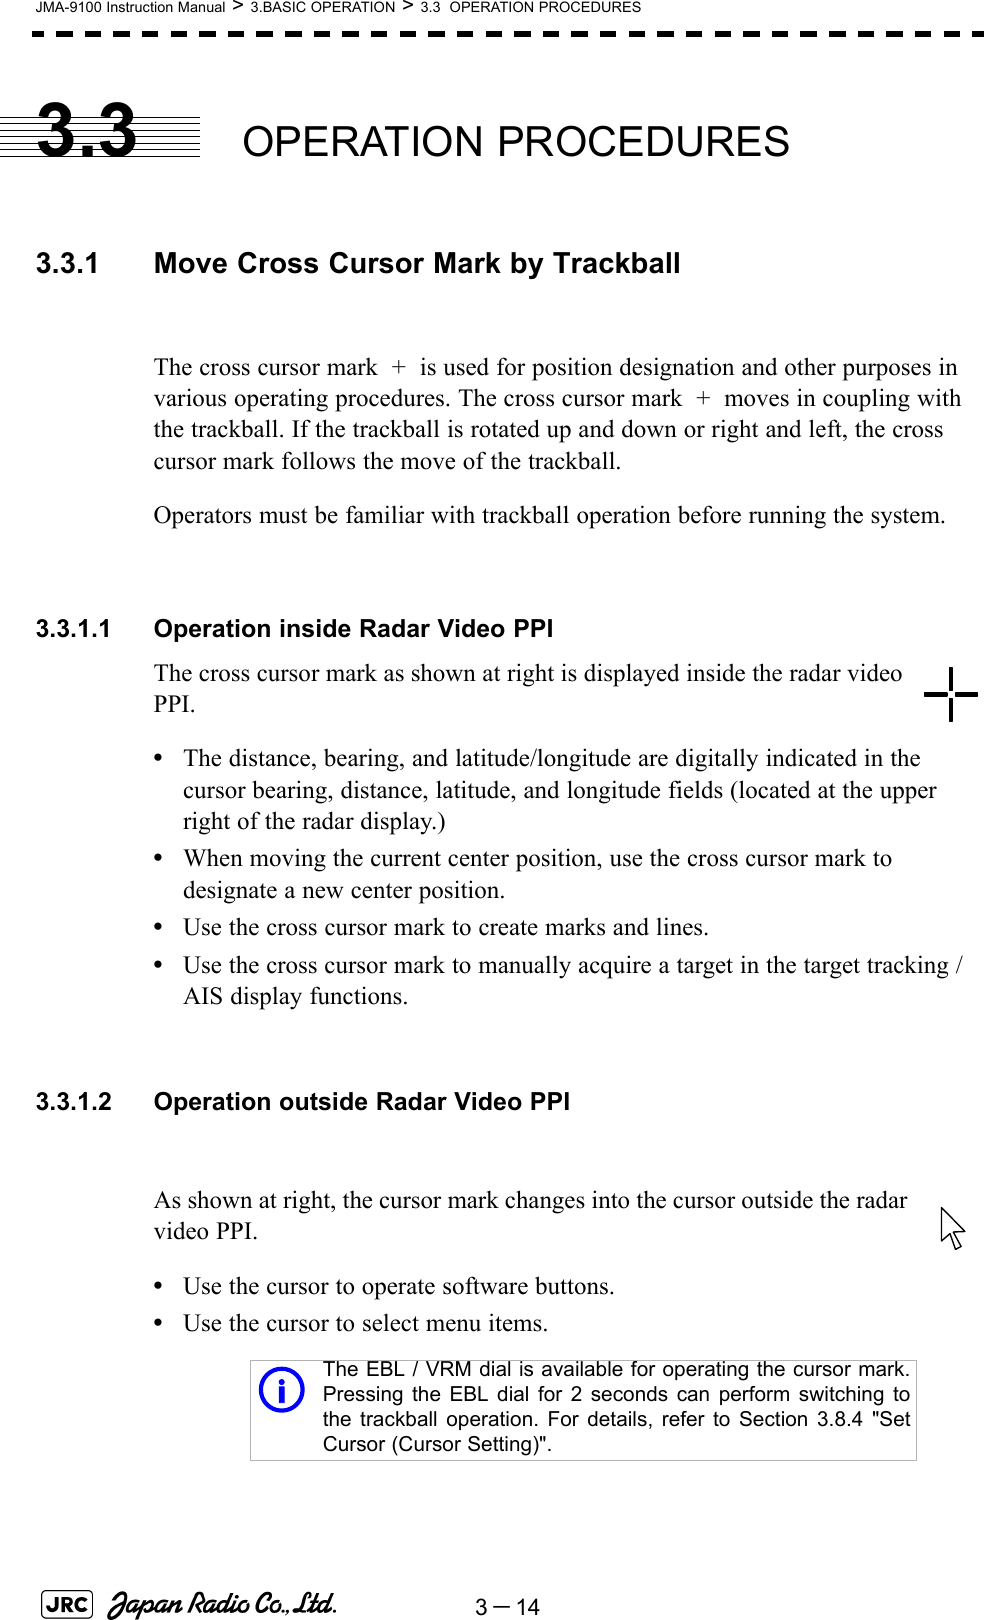 3－14JMA-9100 Instruction Manual &gt; 3.BASIC OPERATION &gt; 3.3  OPERATION PROCEDURES3.3 OPERATION PROCEDURES3.3.1 Move Cross Cursor Mark by TrackballThe cross cursor mark  +  is used for position designation and other purposes in various operating procedures. The cross cursor mark  +  moves in coupling with the trackball. If the trackball is rotated up and down or right and left, the cross cursor mark follows the move of the trackball.Operators must be familiar with trackball operation before running the system.3.3.1.1 Operation inside Radar Video PPIThe cross cursor mark as shown at right is displayed inside the radar video PPI.•The distance, bearing, and latitude/longitude are digitally indicated in the cursor bearing, distance, latitude, and longitude fields (located at the upper right of the radar display.)•When moving the current center position, use the cross cursor mark to designate a new center position.•Use the cross cursor mark to create marks and lines.•Use the cross cursor mark to manually acquire a target in the target tracking /AIS display functions.3.3.1.2 Operation outside Radar Video PPIAs shown at right, the cursor mark changes into the cursor outside the radar video PPI.•Use the cursor to operate software buttons.•Use the cursor to select menu items.iThe EBL / VRM dial is available for operating the cursor mark.Pressing the EBL dial for 2 seconds can perform switching tothe trackball operation. For details, refer to Section 3.8.4 &quot;SetCursor (Cursor Setting)&quot;.